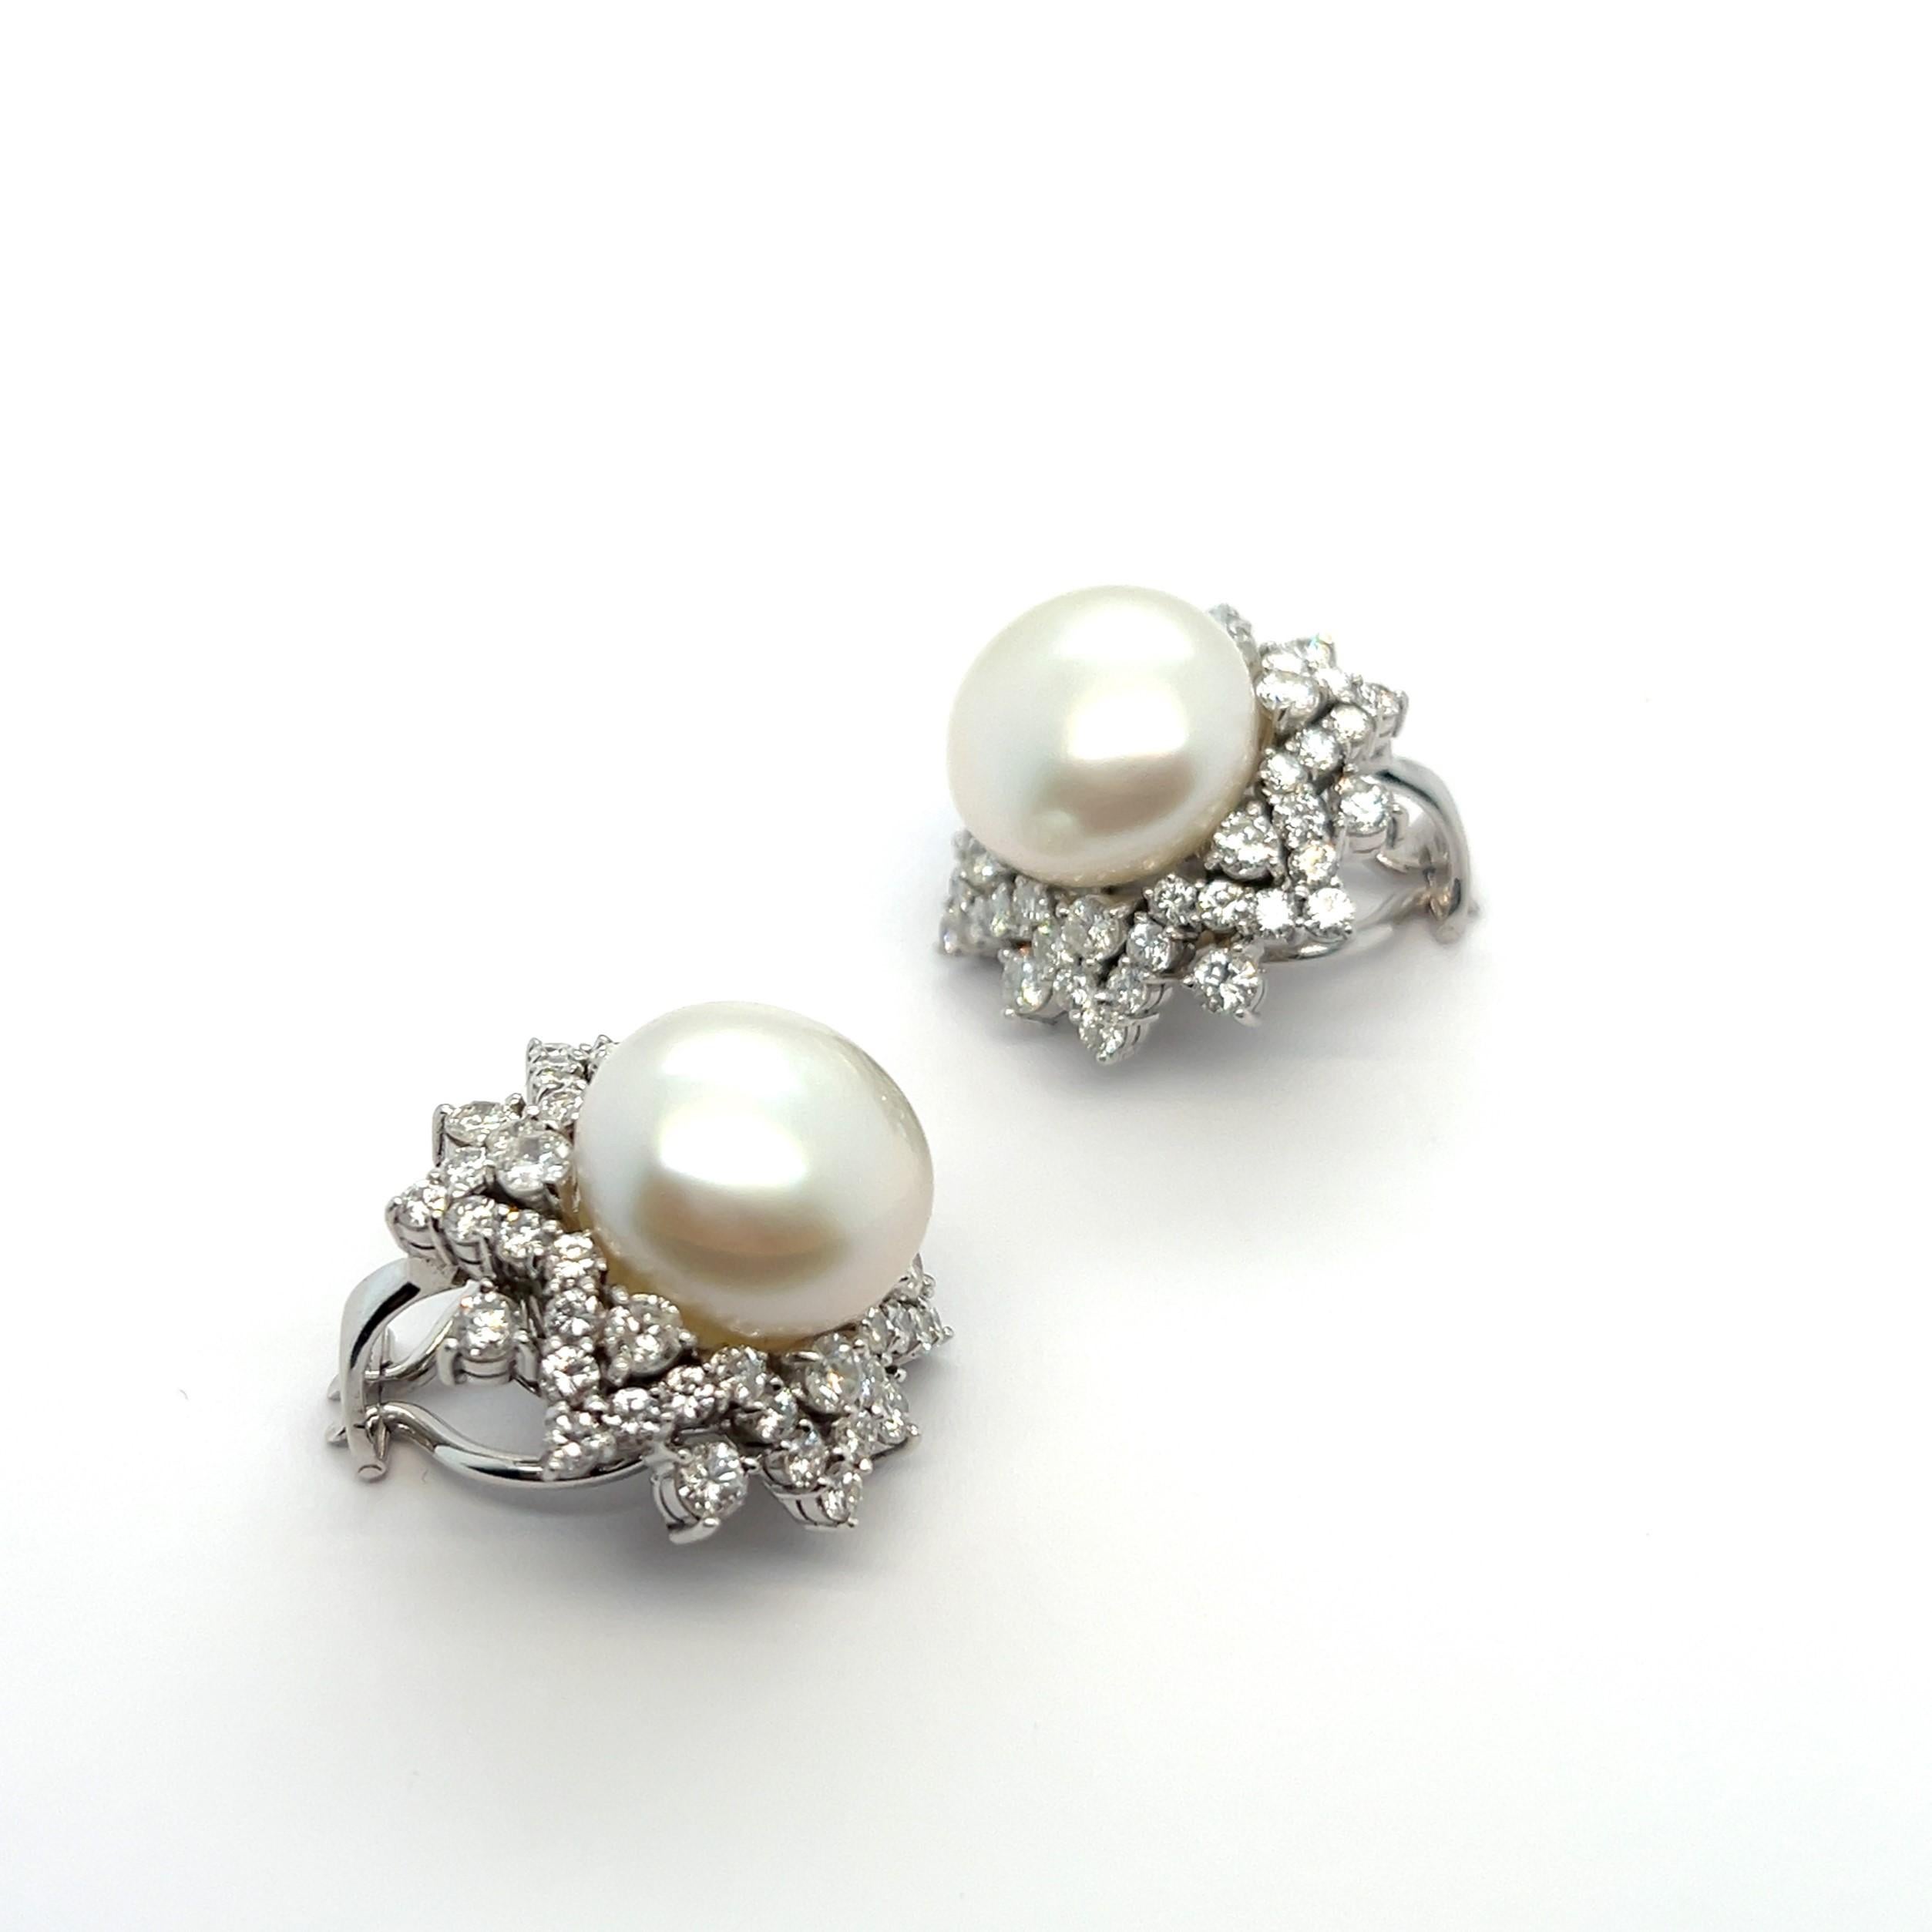 South Sea Pearl Earrings in 18 Karat White Gold by Meister For Sale 4